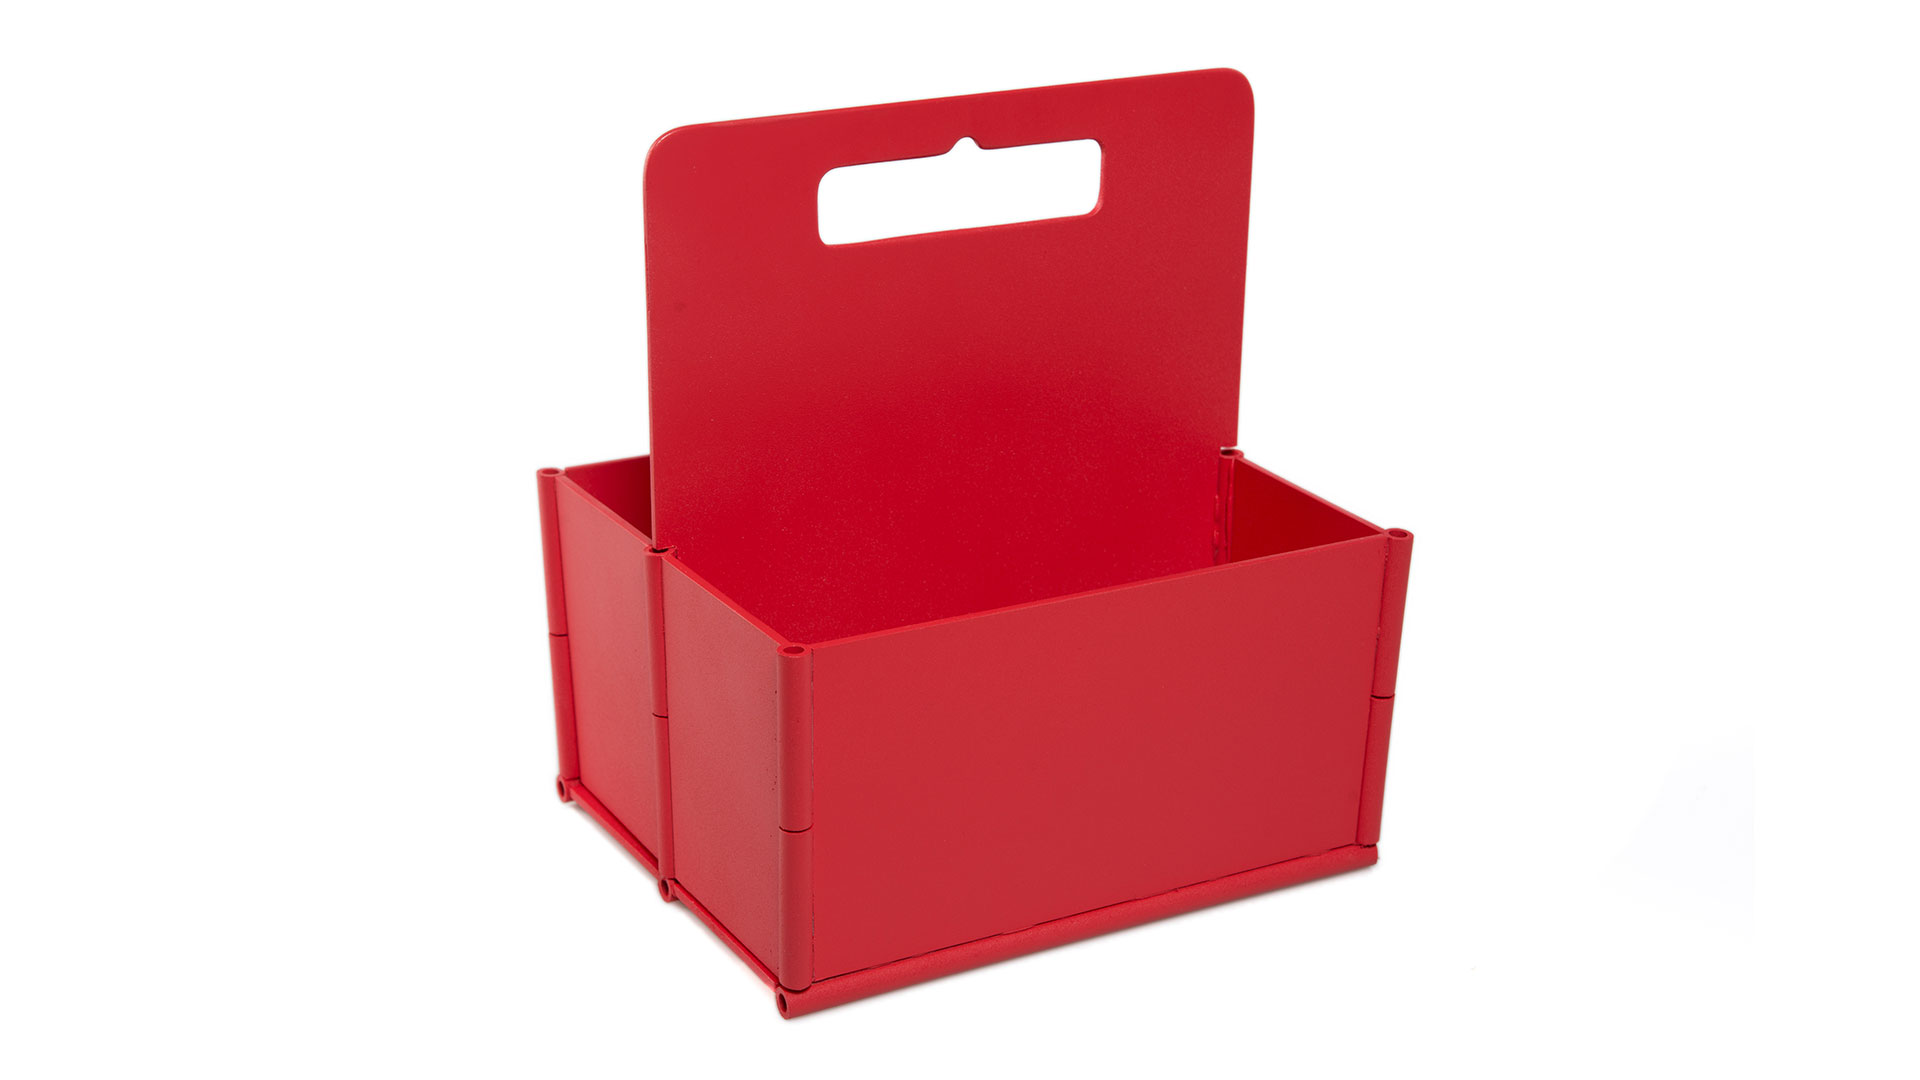 Empty Red rectangular six pack carrier with center handle